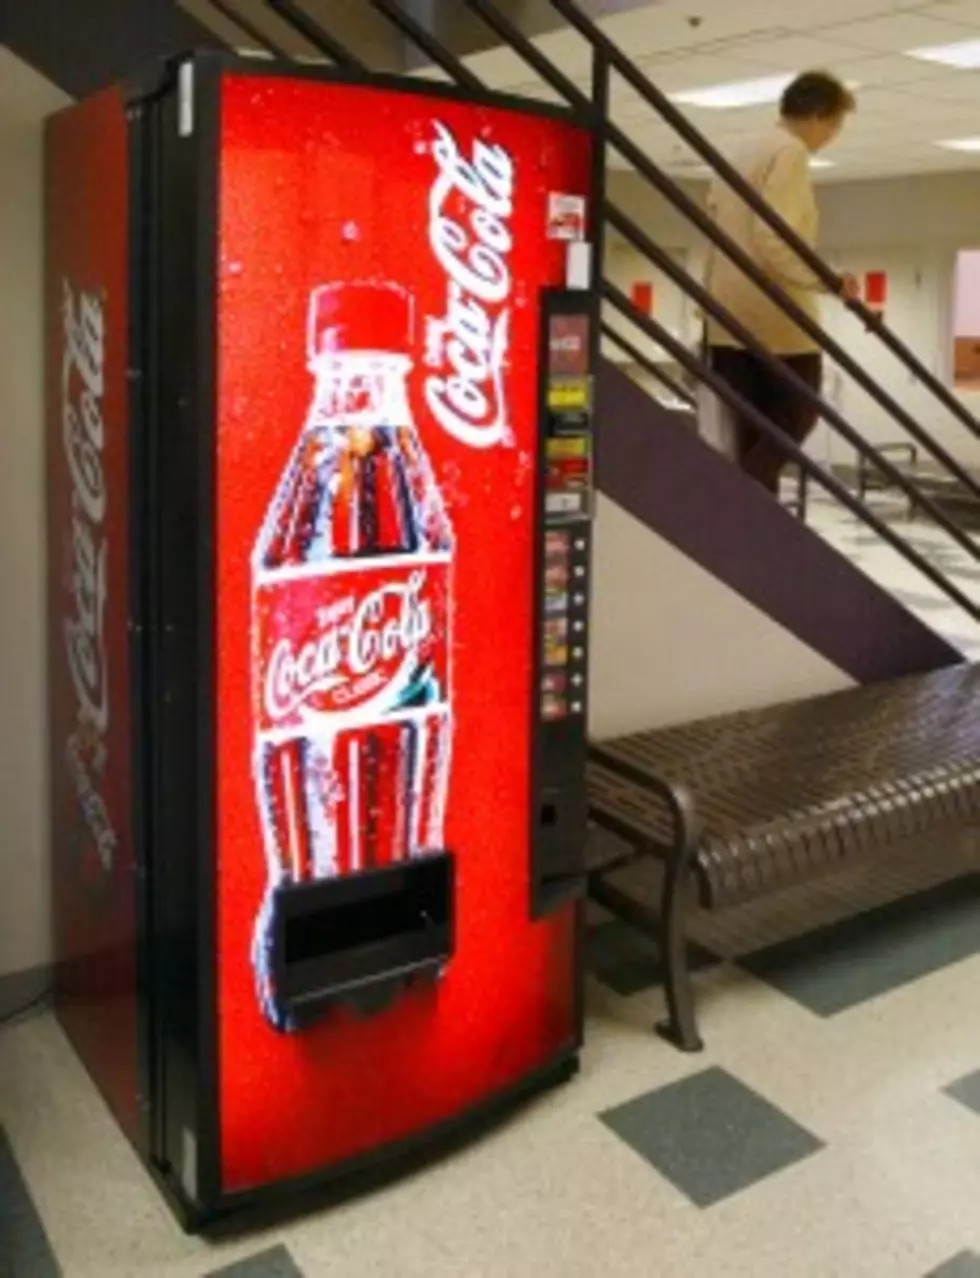 DOUCHE OF THE DAY-Police Say Man Was Touching Self By Soda Machine